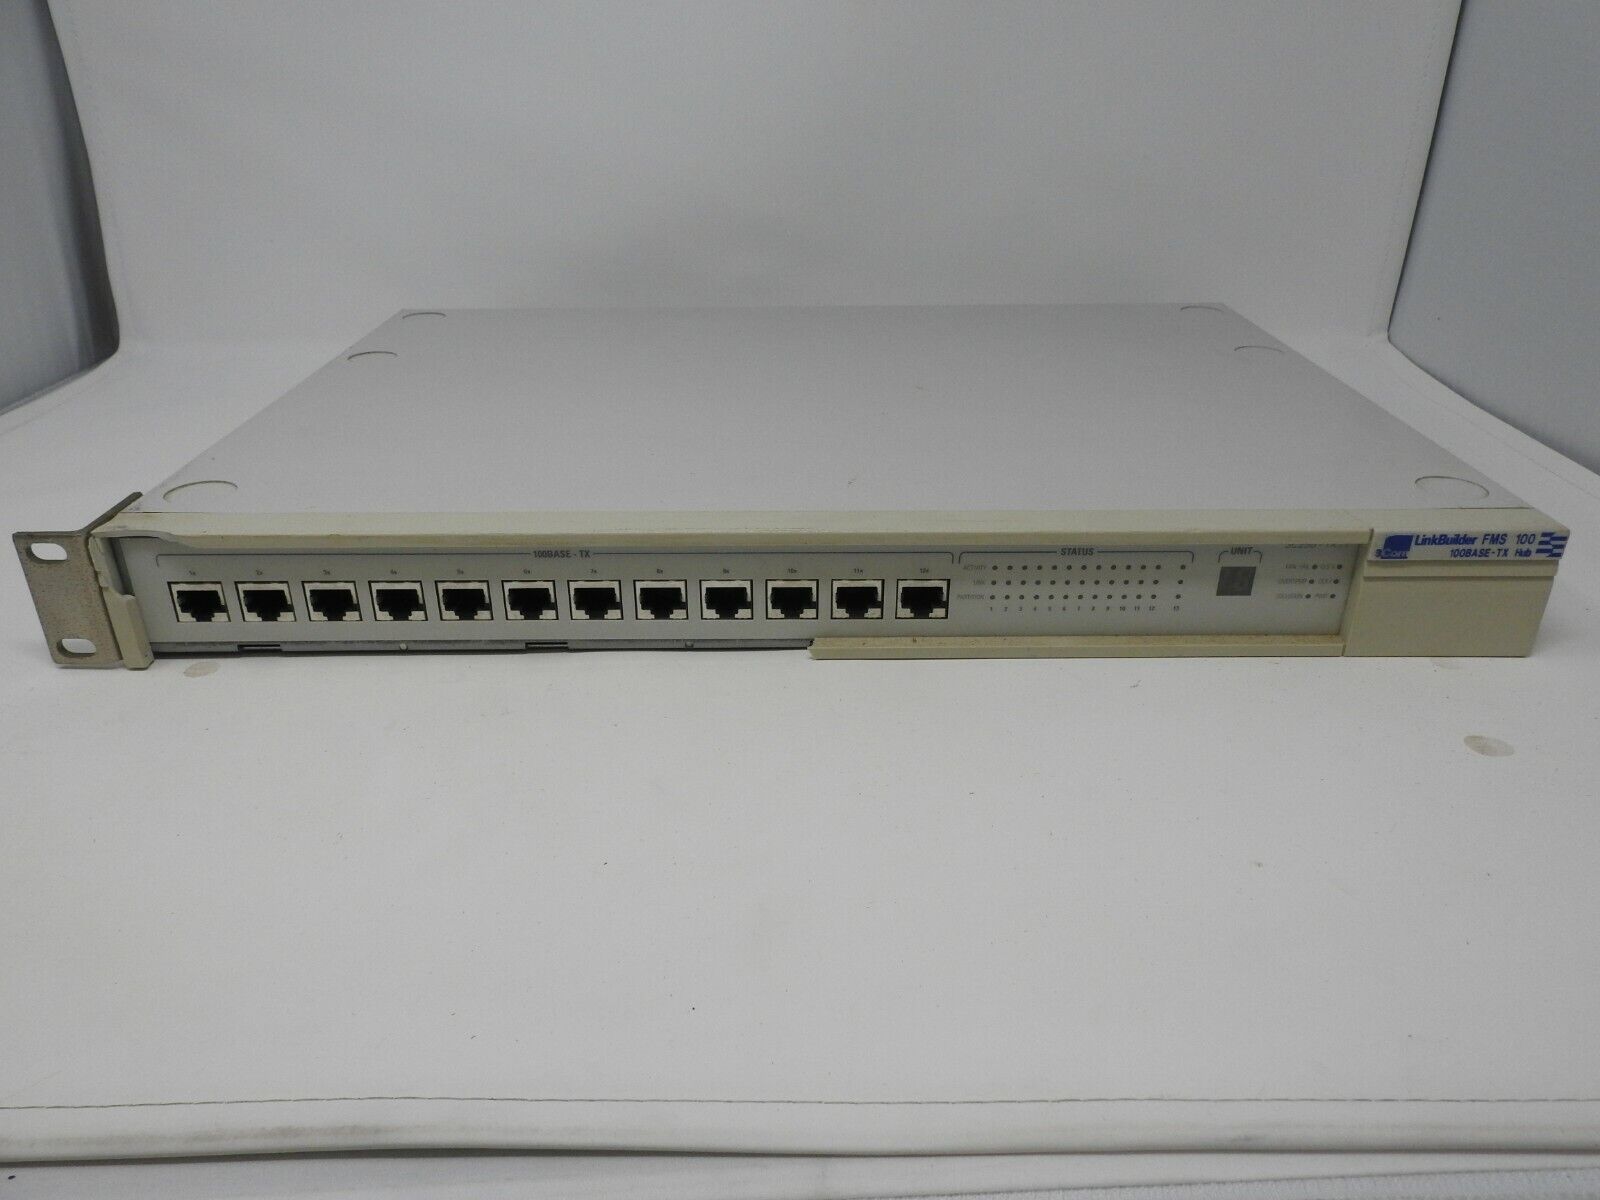 3COM LINKBUILDER FMS 100 3C250-TX/1 Not Tested. Usually ships in 12 hours